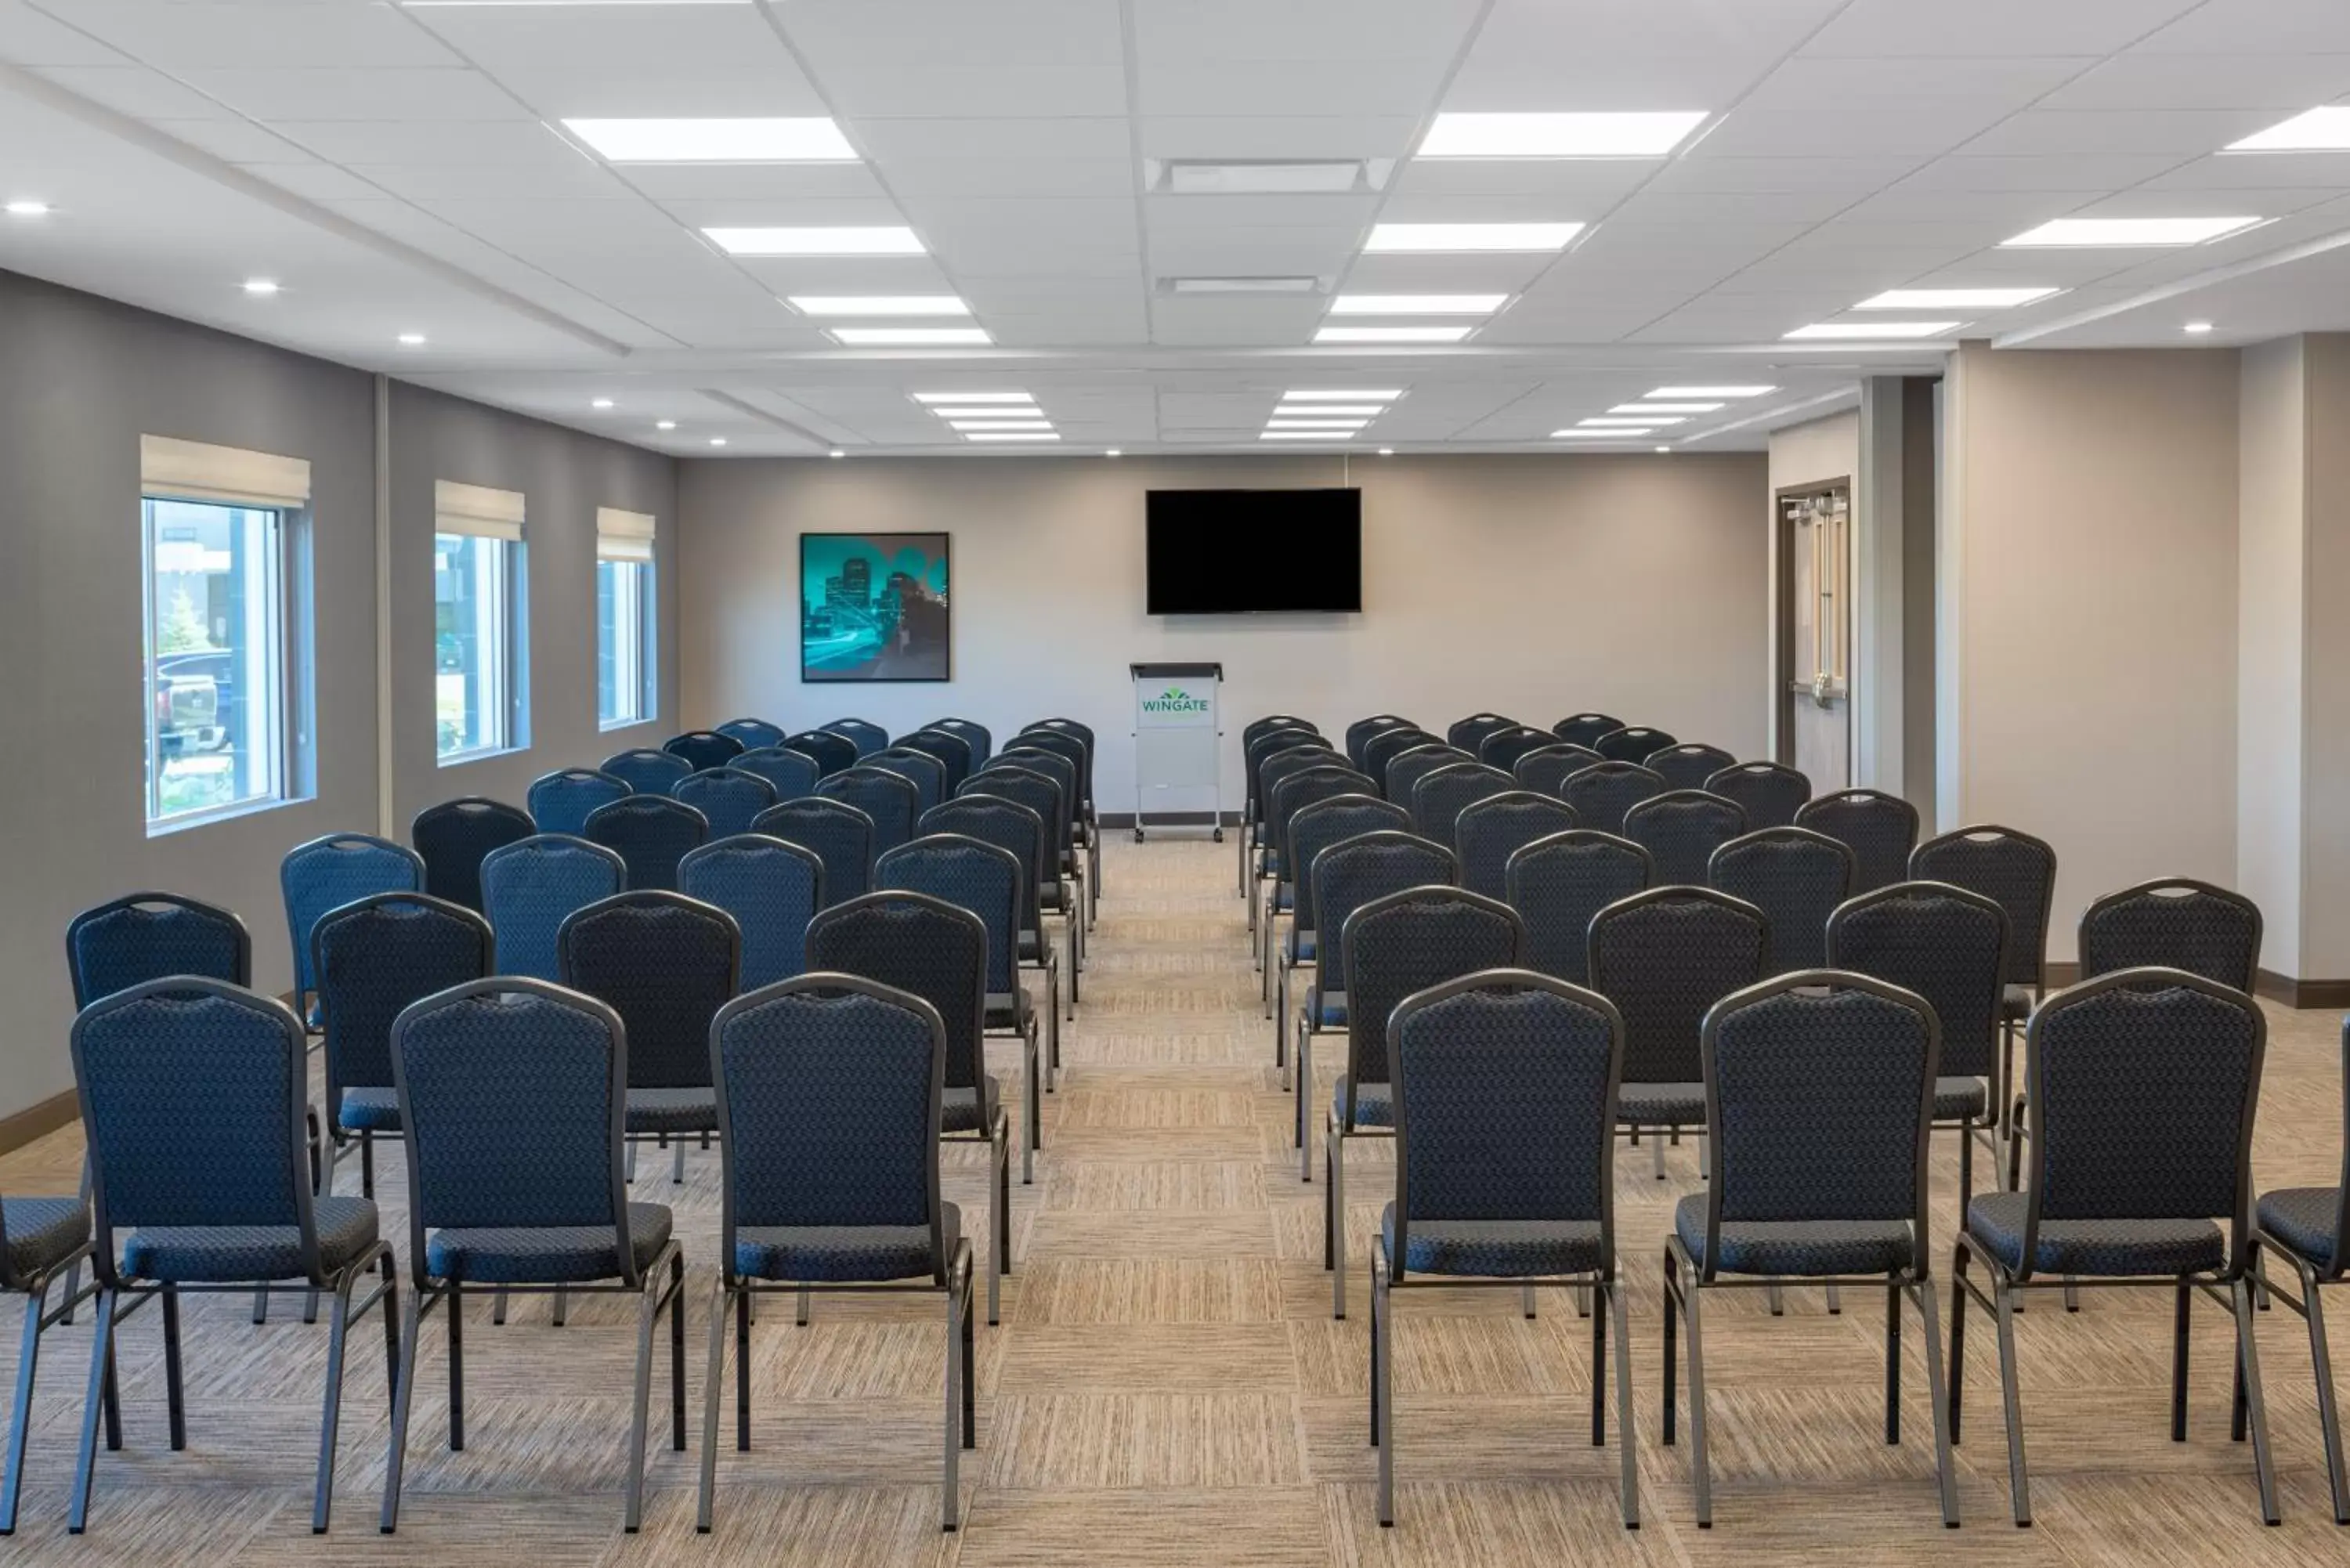 Meeting/conference room in Wingate by Wyndham Kanata West Ottawa